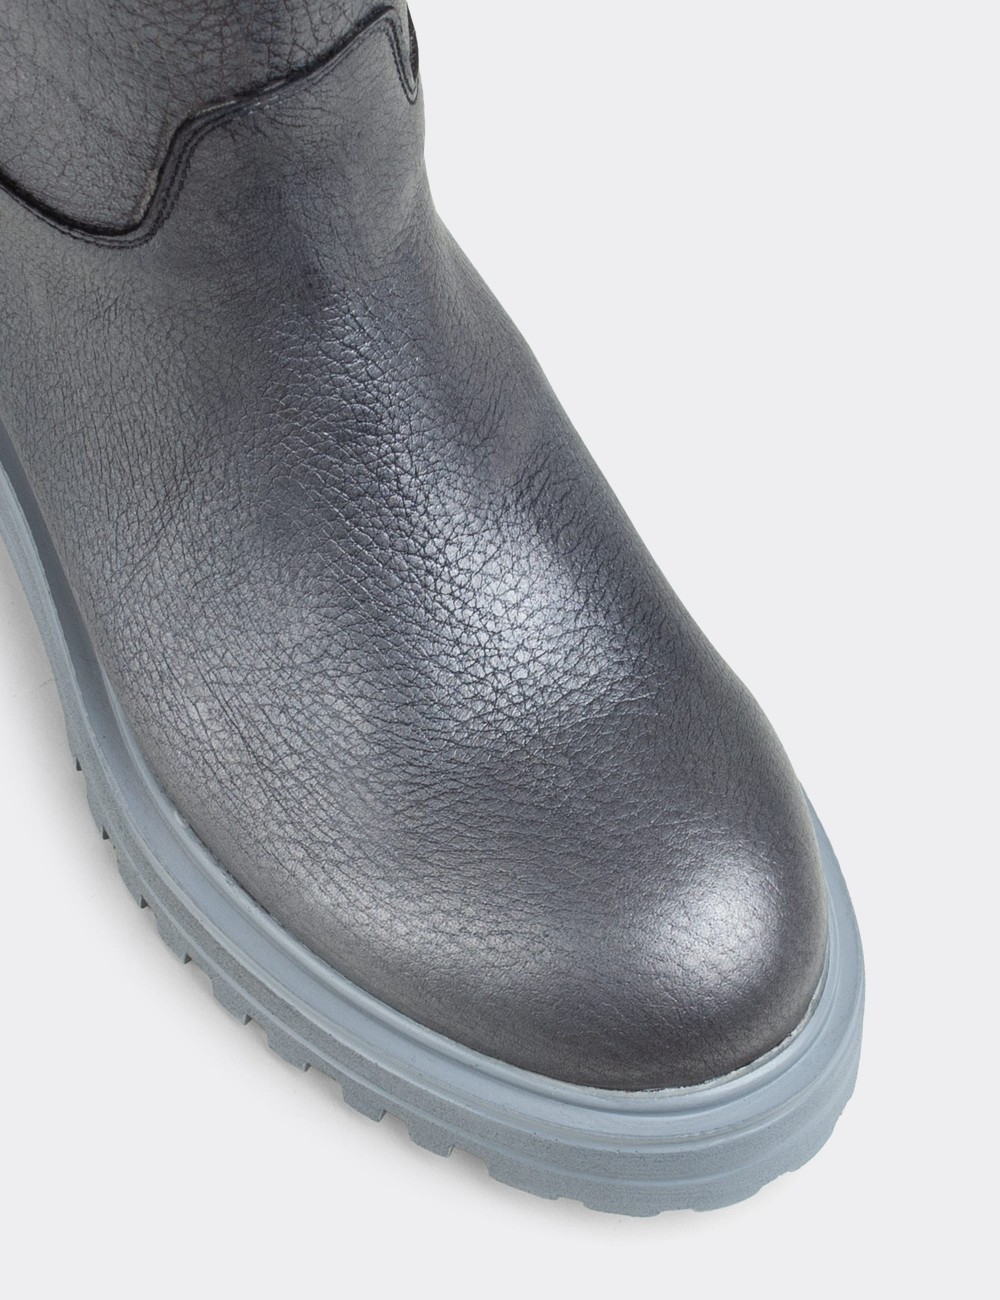 Gray  Leather Boots - E1071ZGRIE01